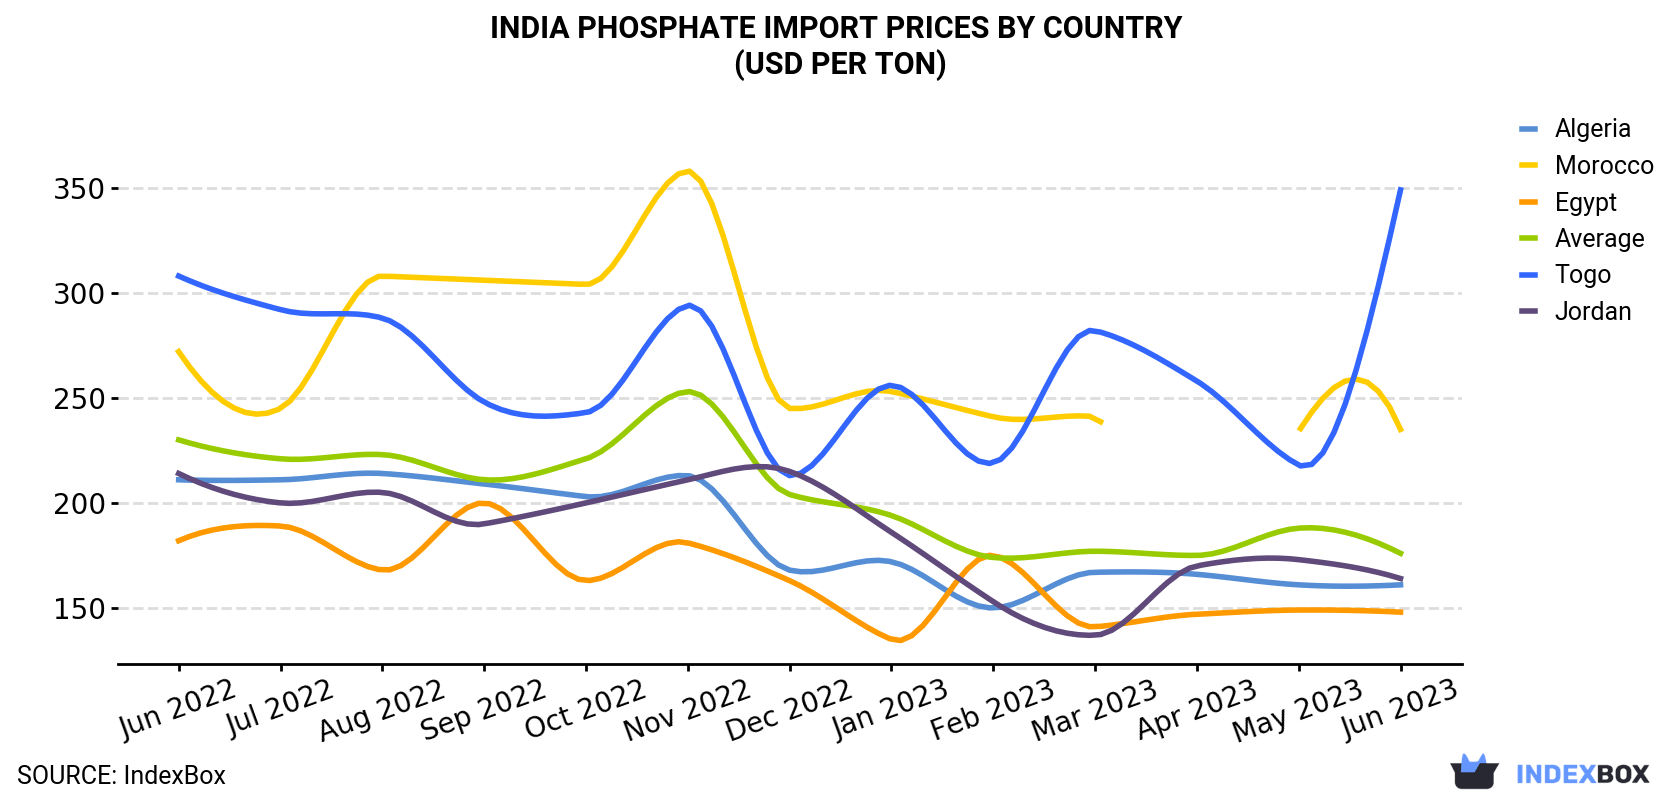 India Phosphate Import Prices By Country (USD Per Ton)